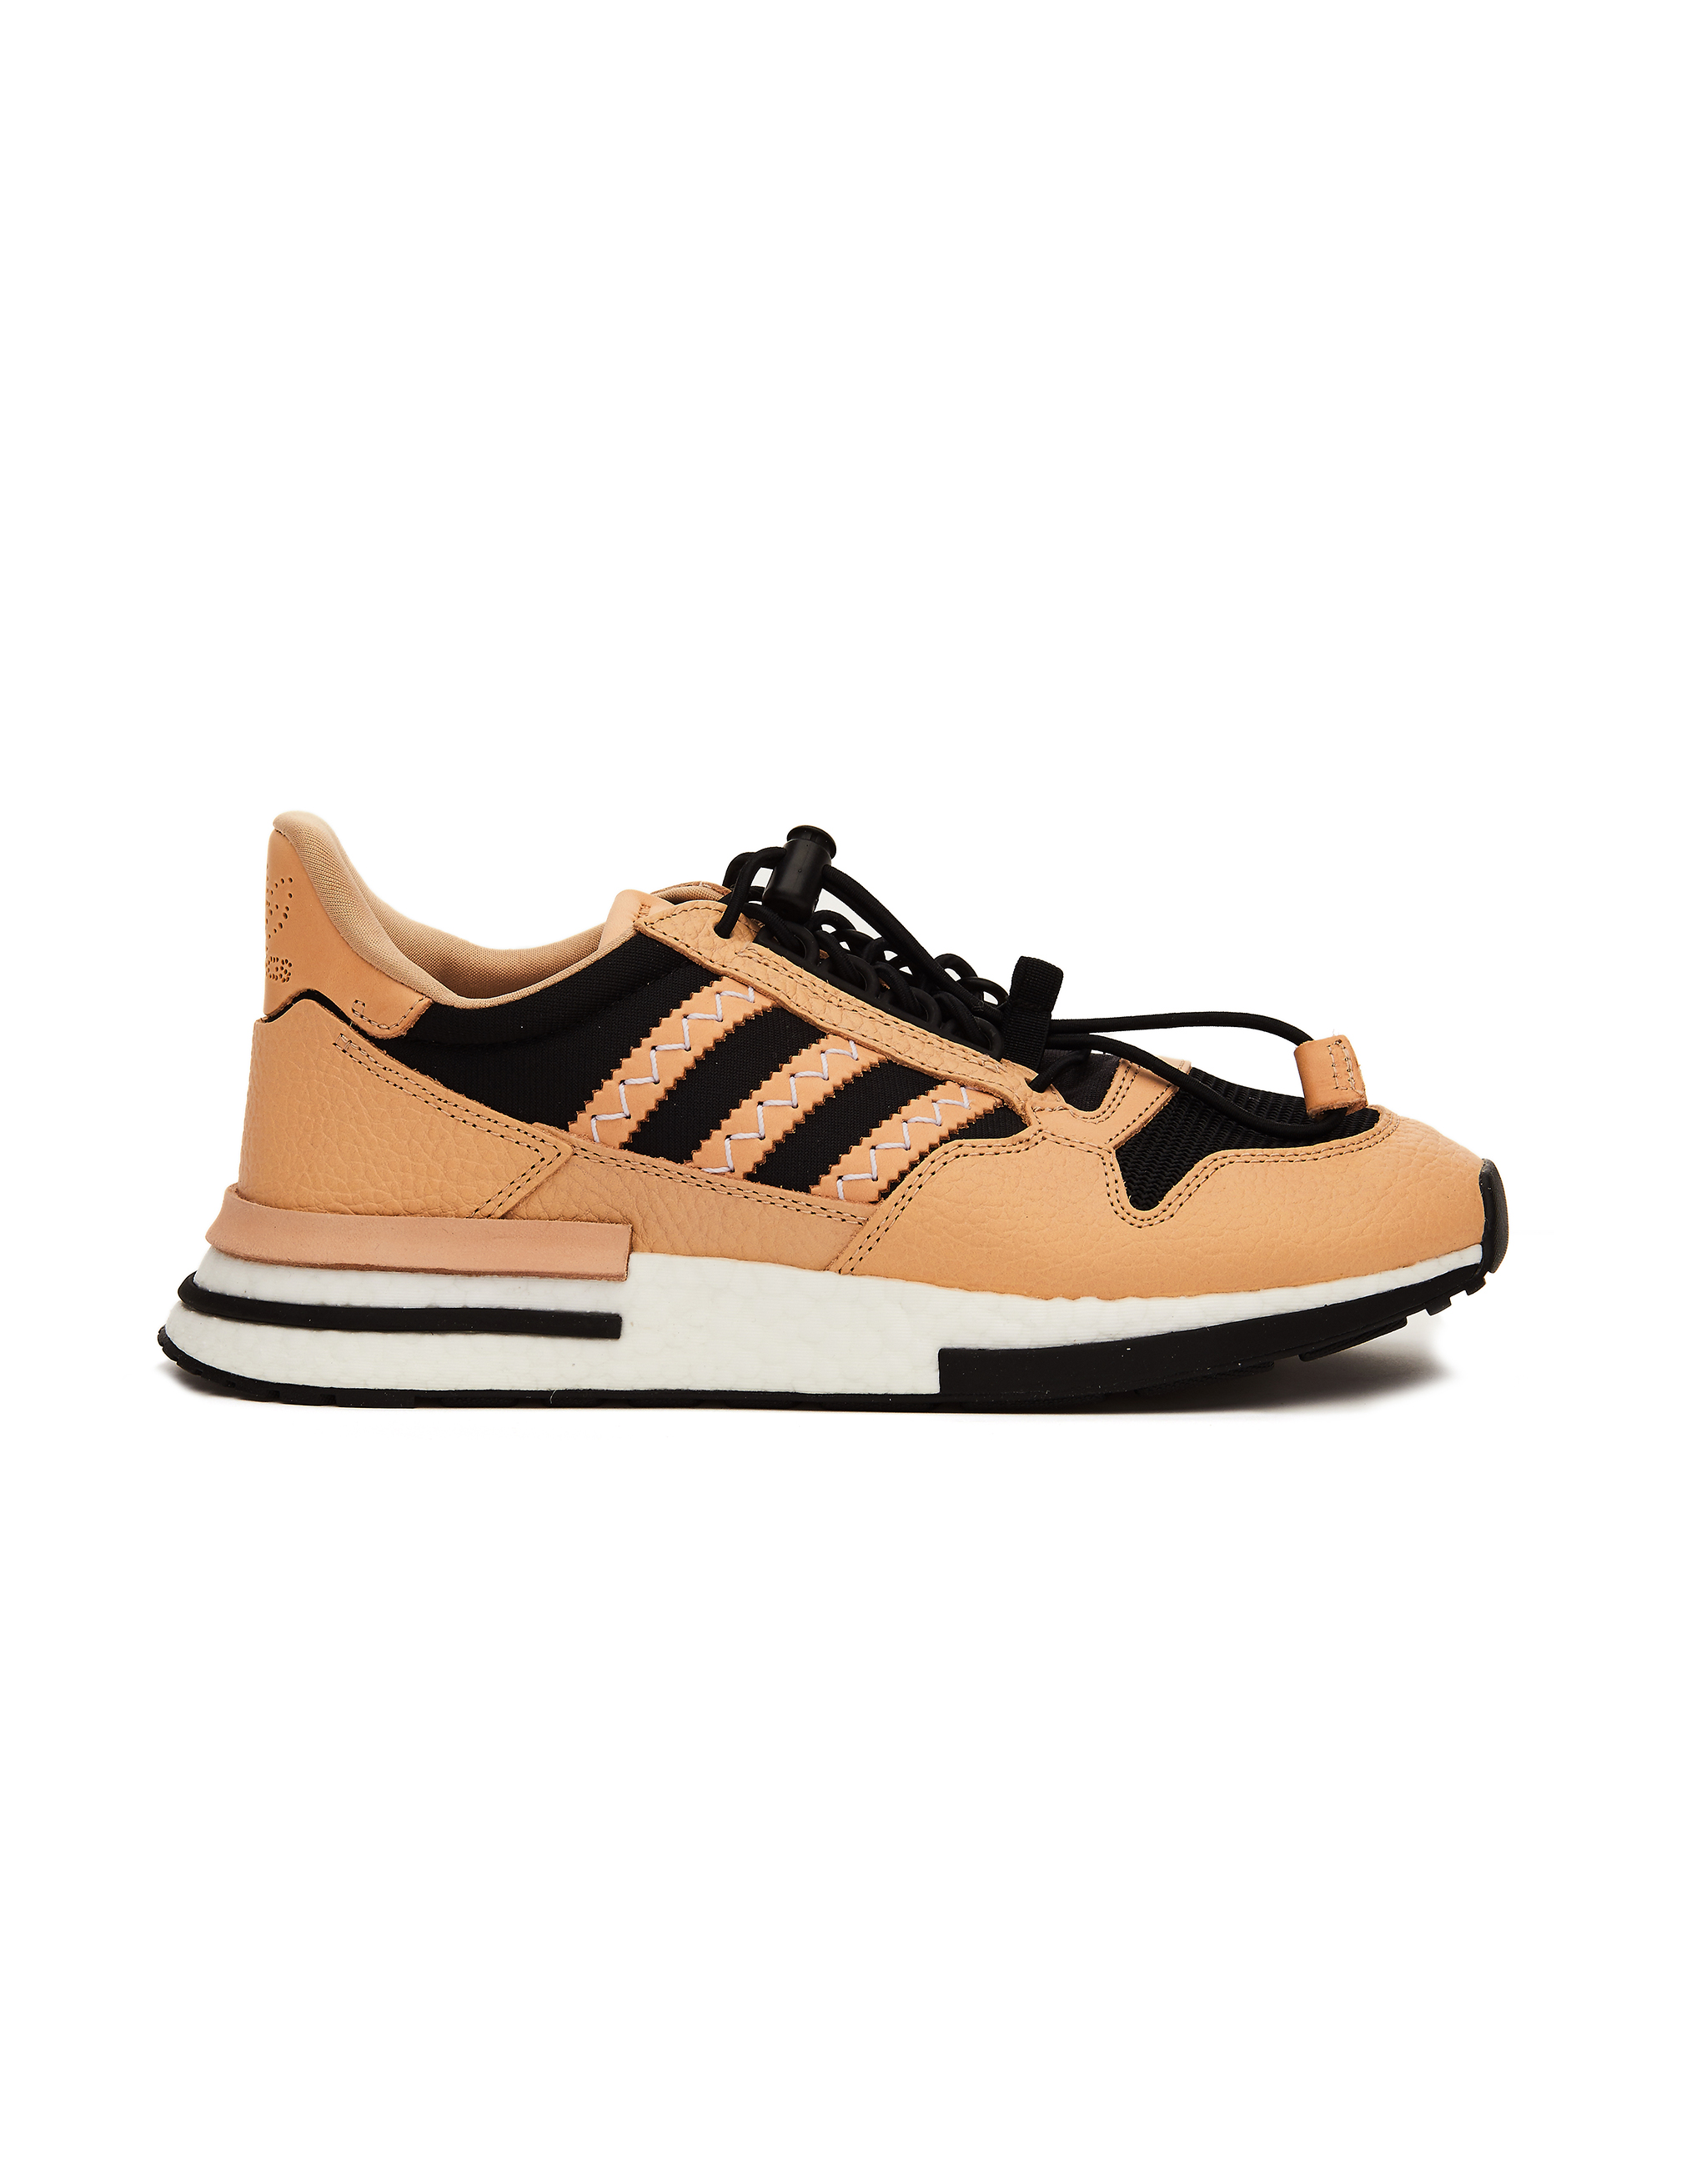 Adidas HS ZX500 RM Leather Sneakers 